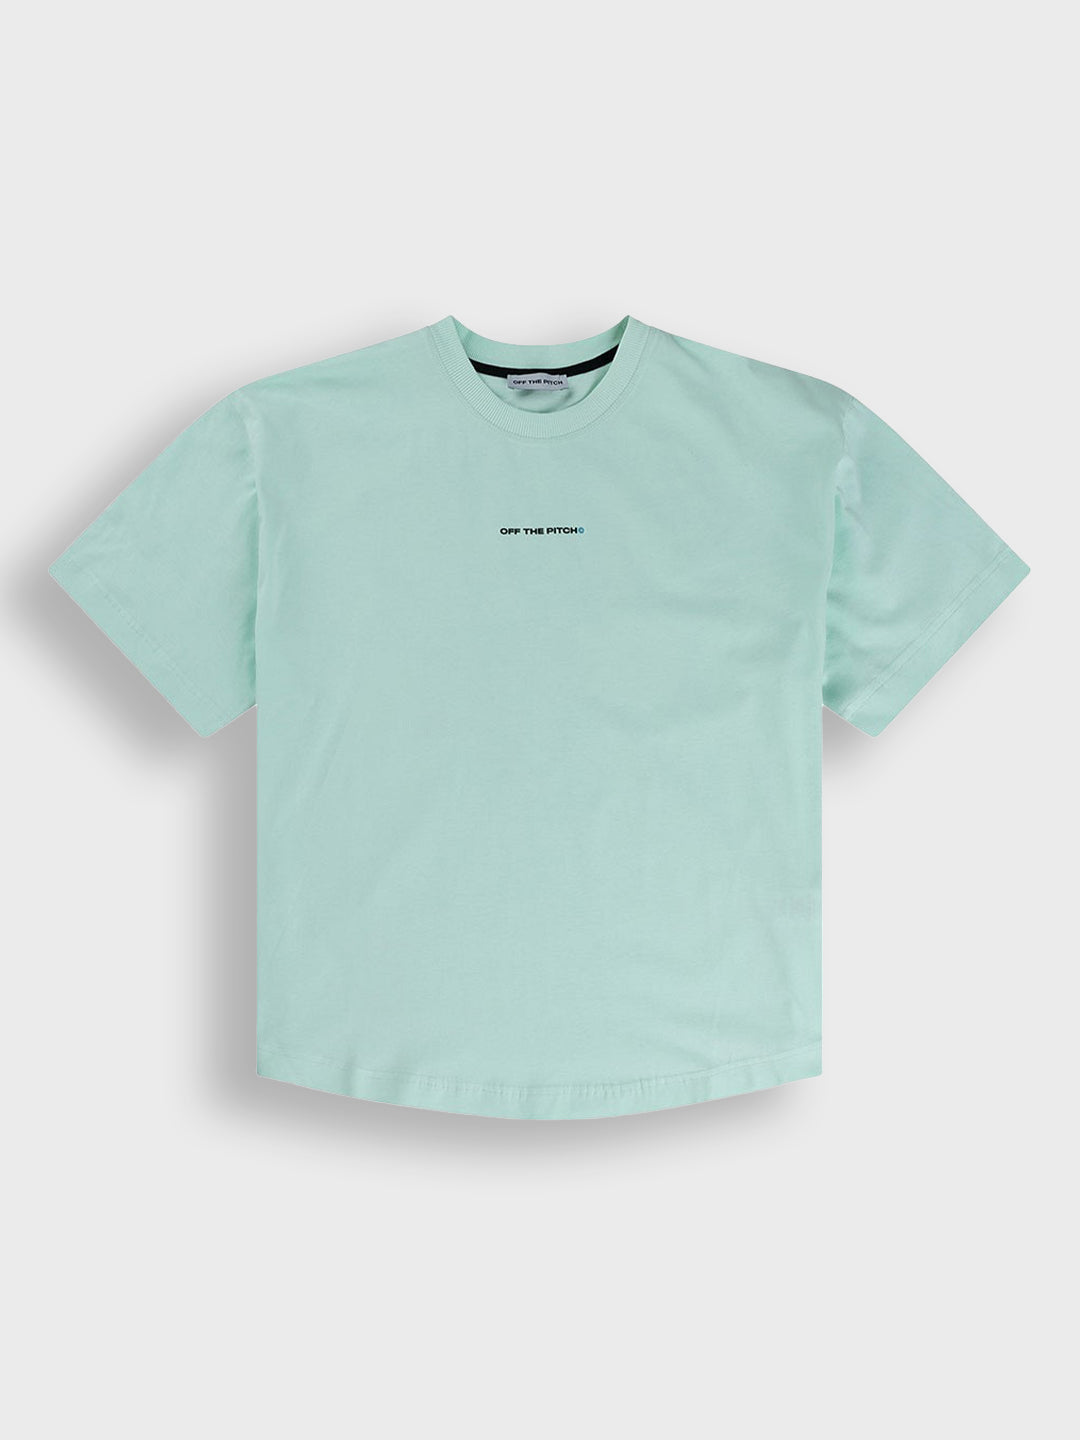 off the pitch oversized t-shirt